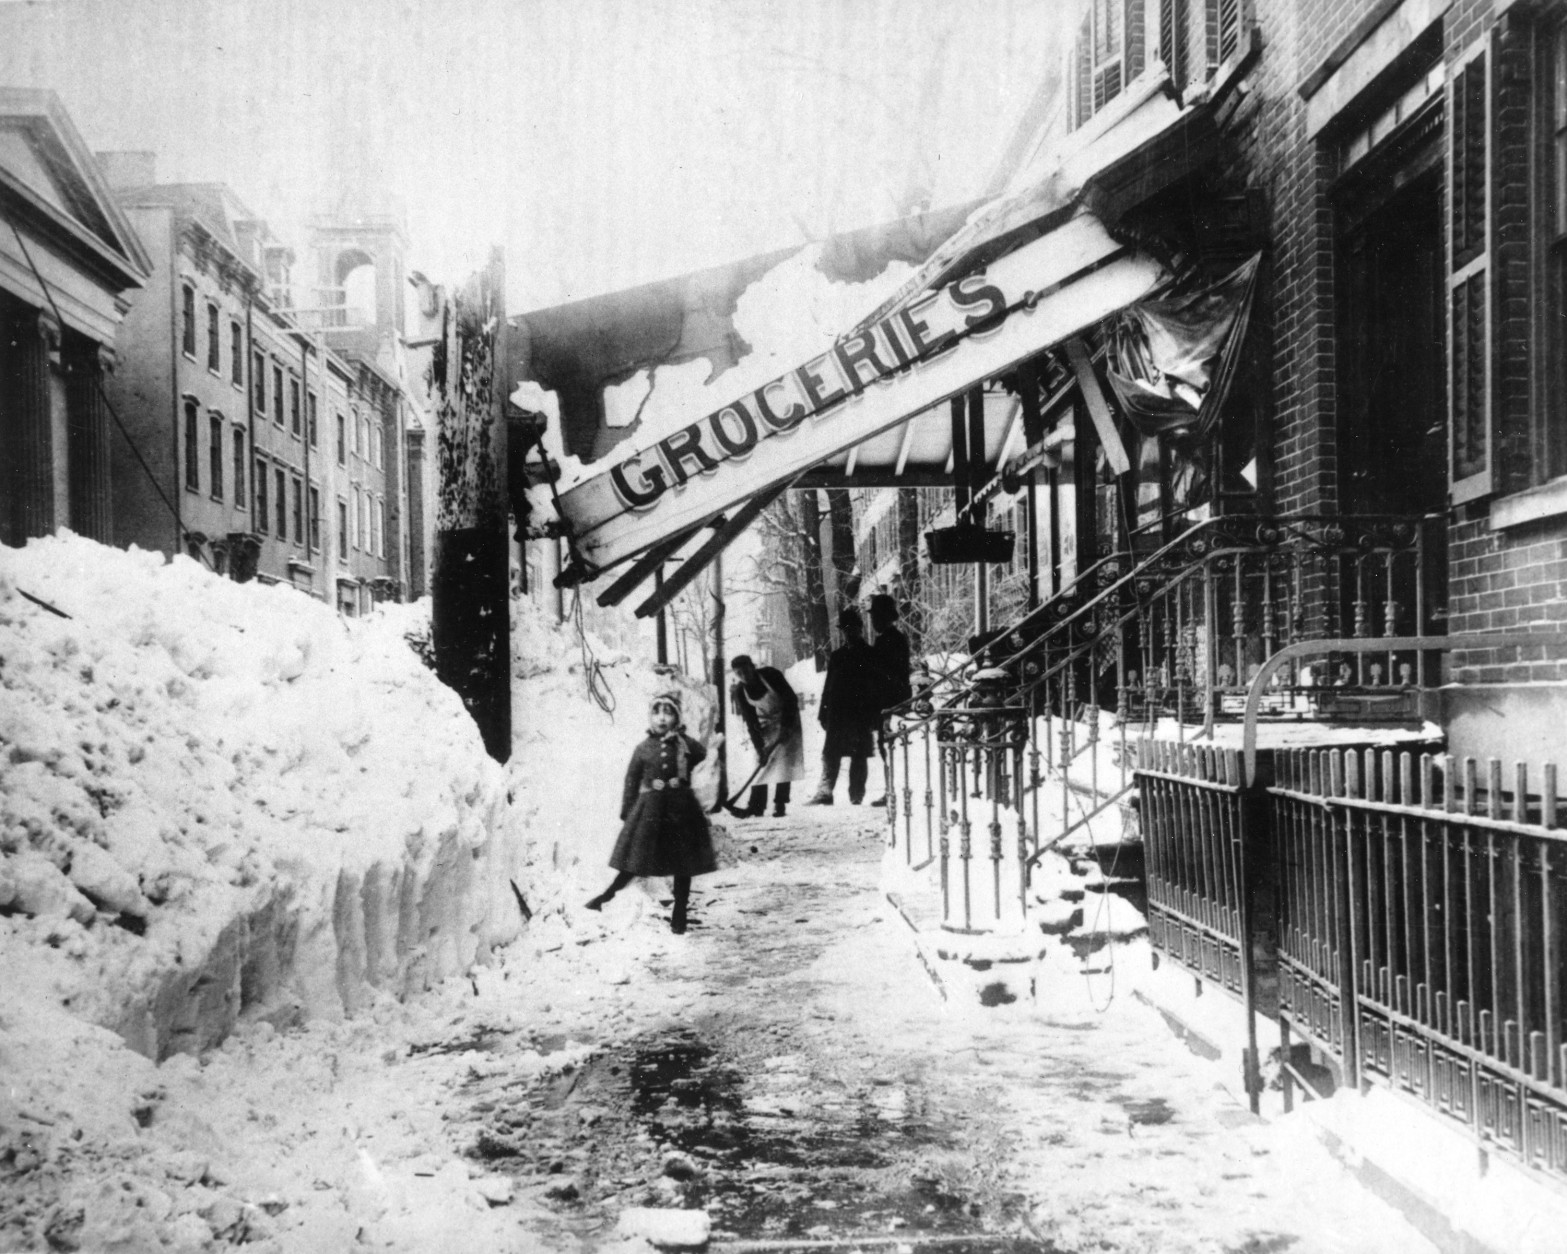 The awning of a grocery store is damaged from the weight of the snow during the blizzard of 1888 in New York City.  The blizzard on March 12-14 paralyzed the city with about 40" of snow and winds that reached up to 60 miles per hour, creating drifts as high as fifty feet.  (AP Photo)